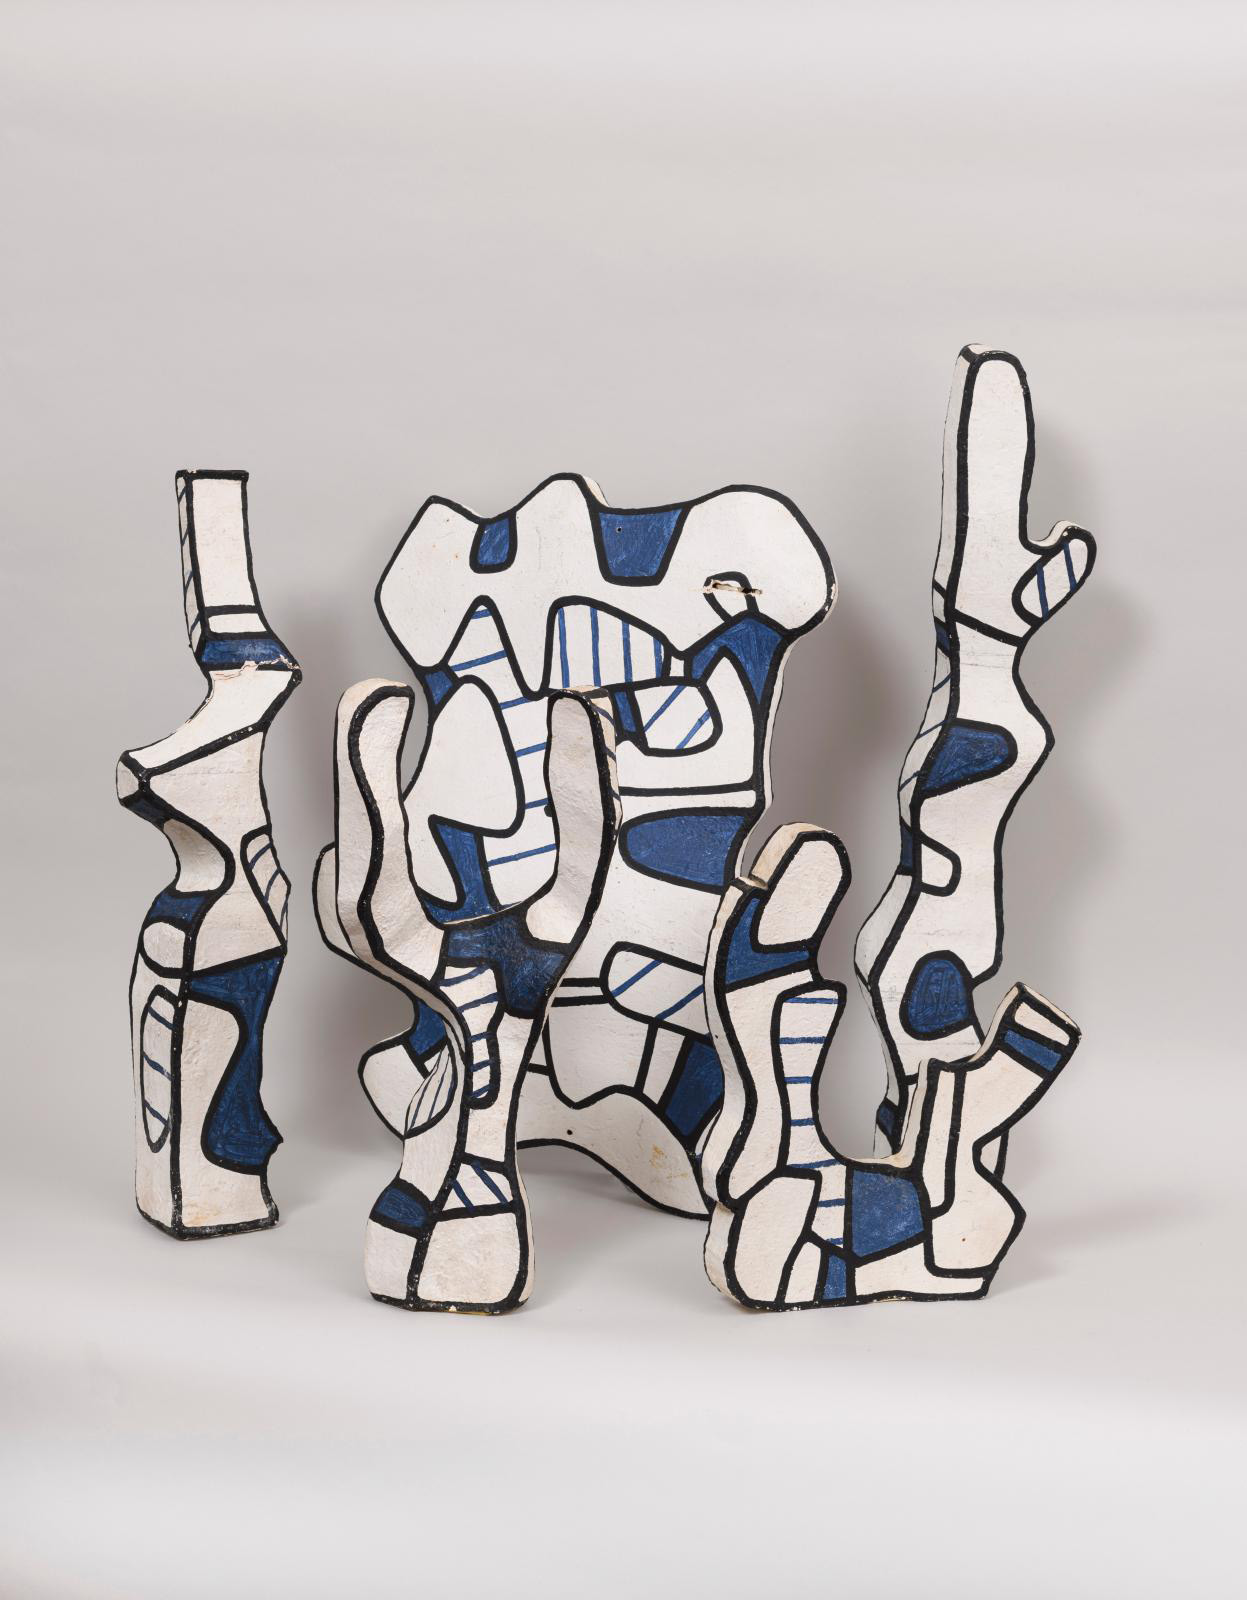 Jean Dubuffet’s Extraordinary Garden for the French Car Brand Renault